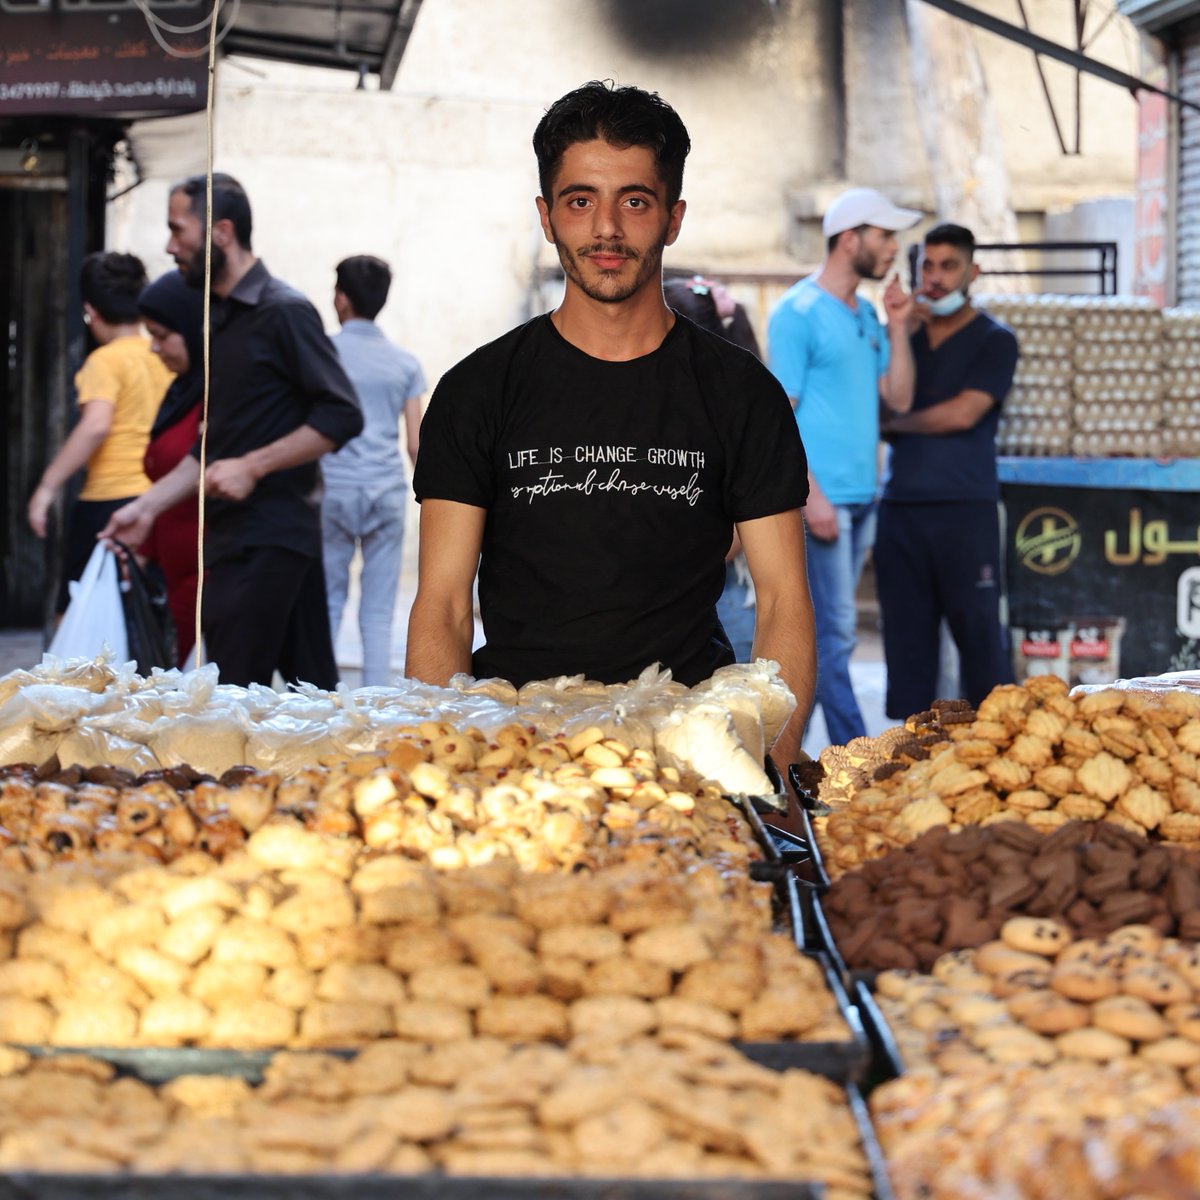 We are just a few days away from #Eid as millions in the #MiddleEast and #NorthAfrica region celebrate baking celebratory biscuits & cookies. 

🚨 But in #Syria, the unprecedented 106% increase in food prices makes it difficult for many families to celebrate this year.